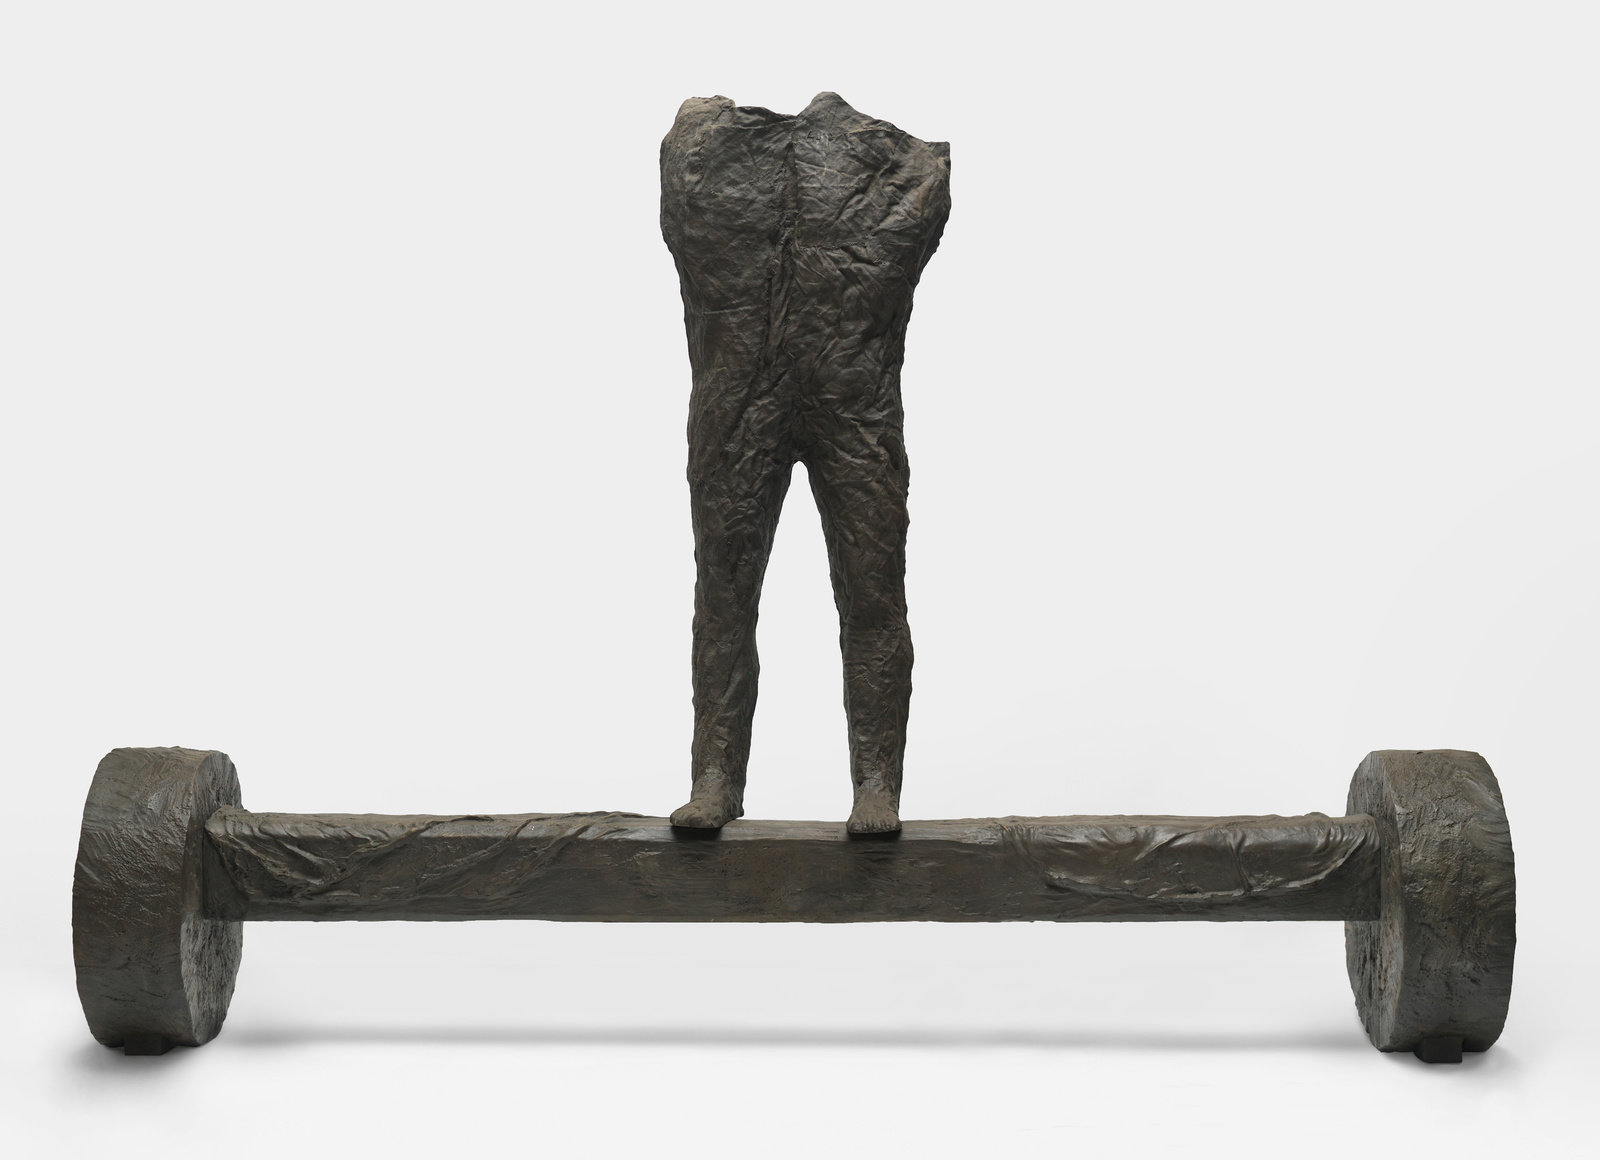 Abakanowicz, the son of gigant, 2003, bronze, 85 x 121 1 2 x 26 in, non 42 767, by grubb